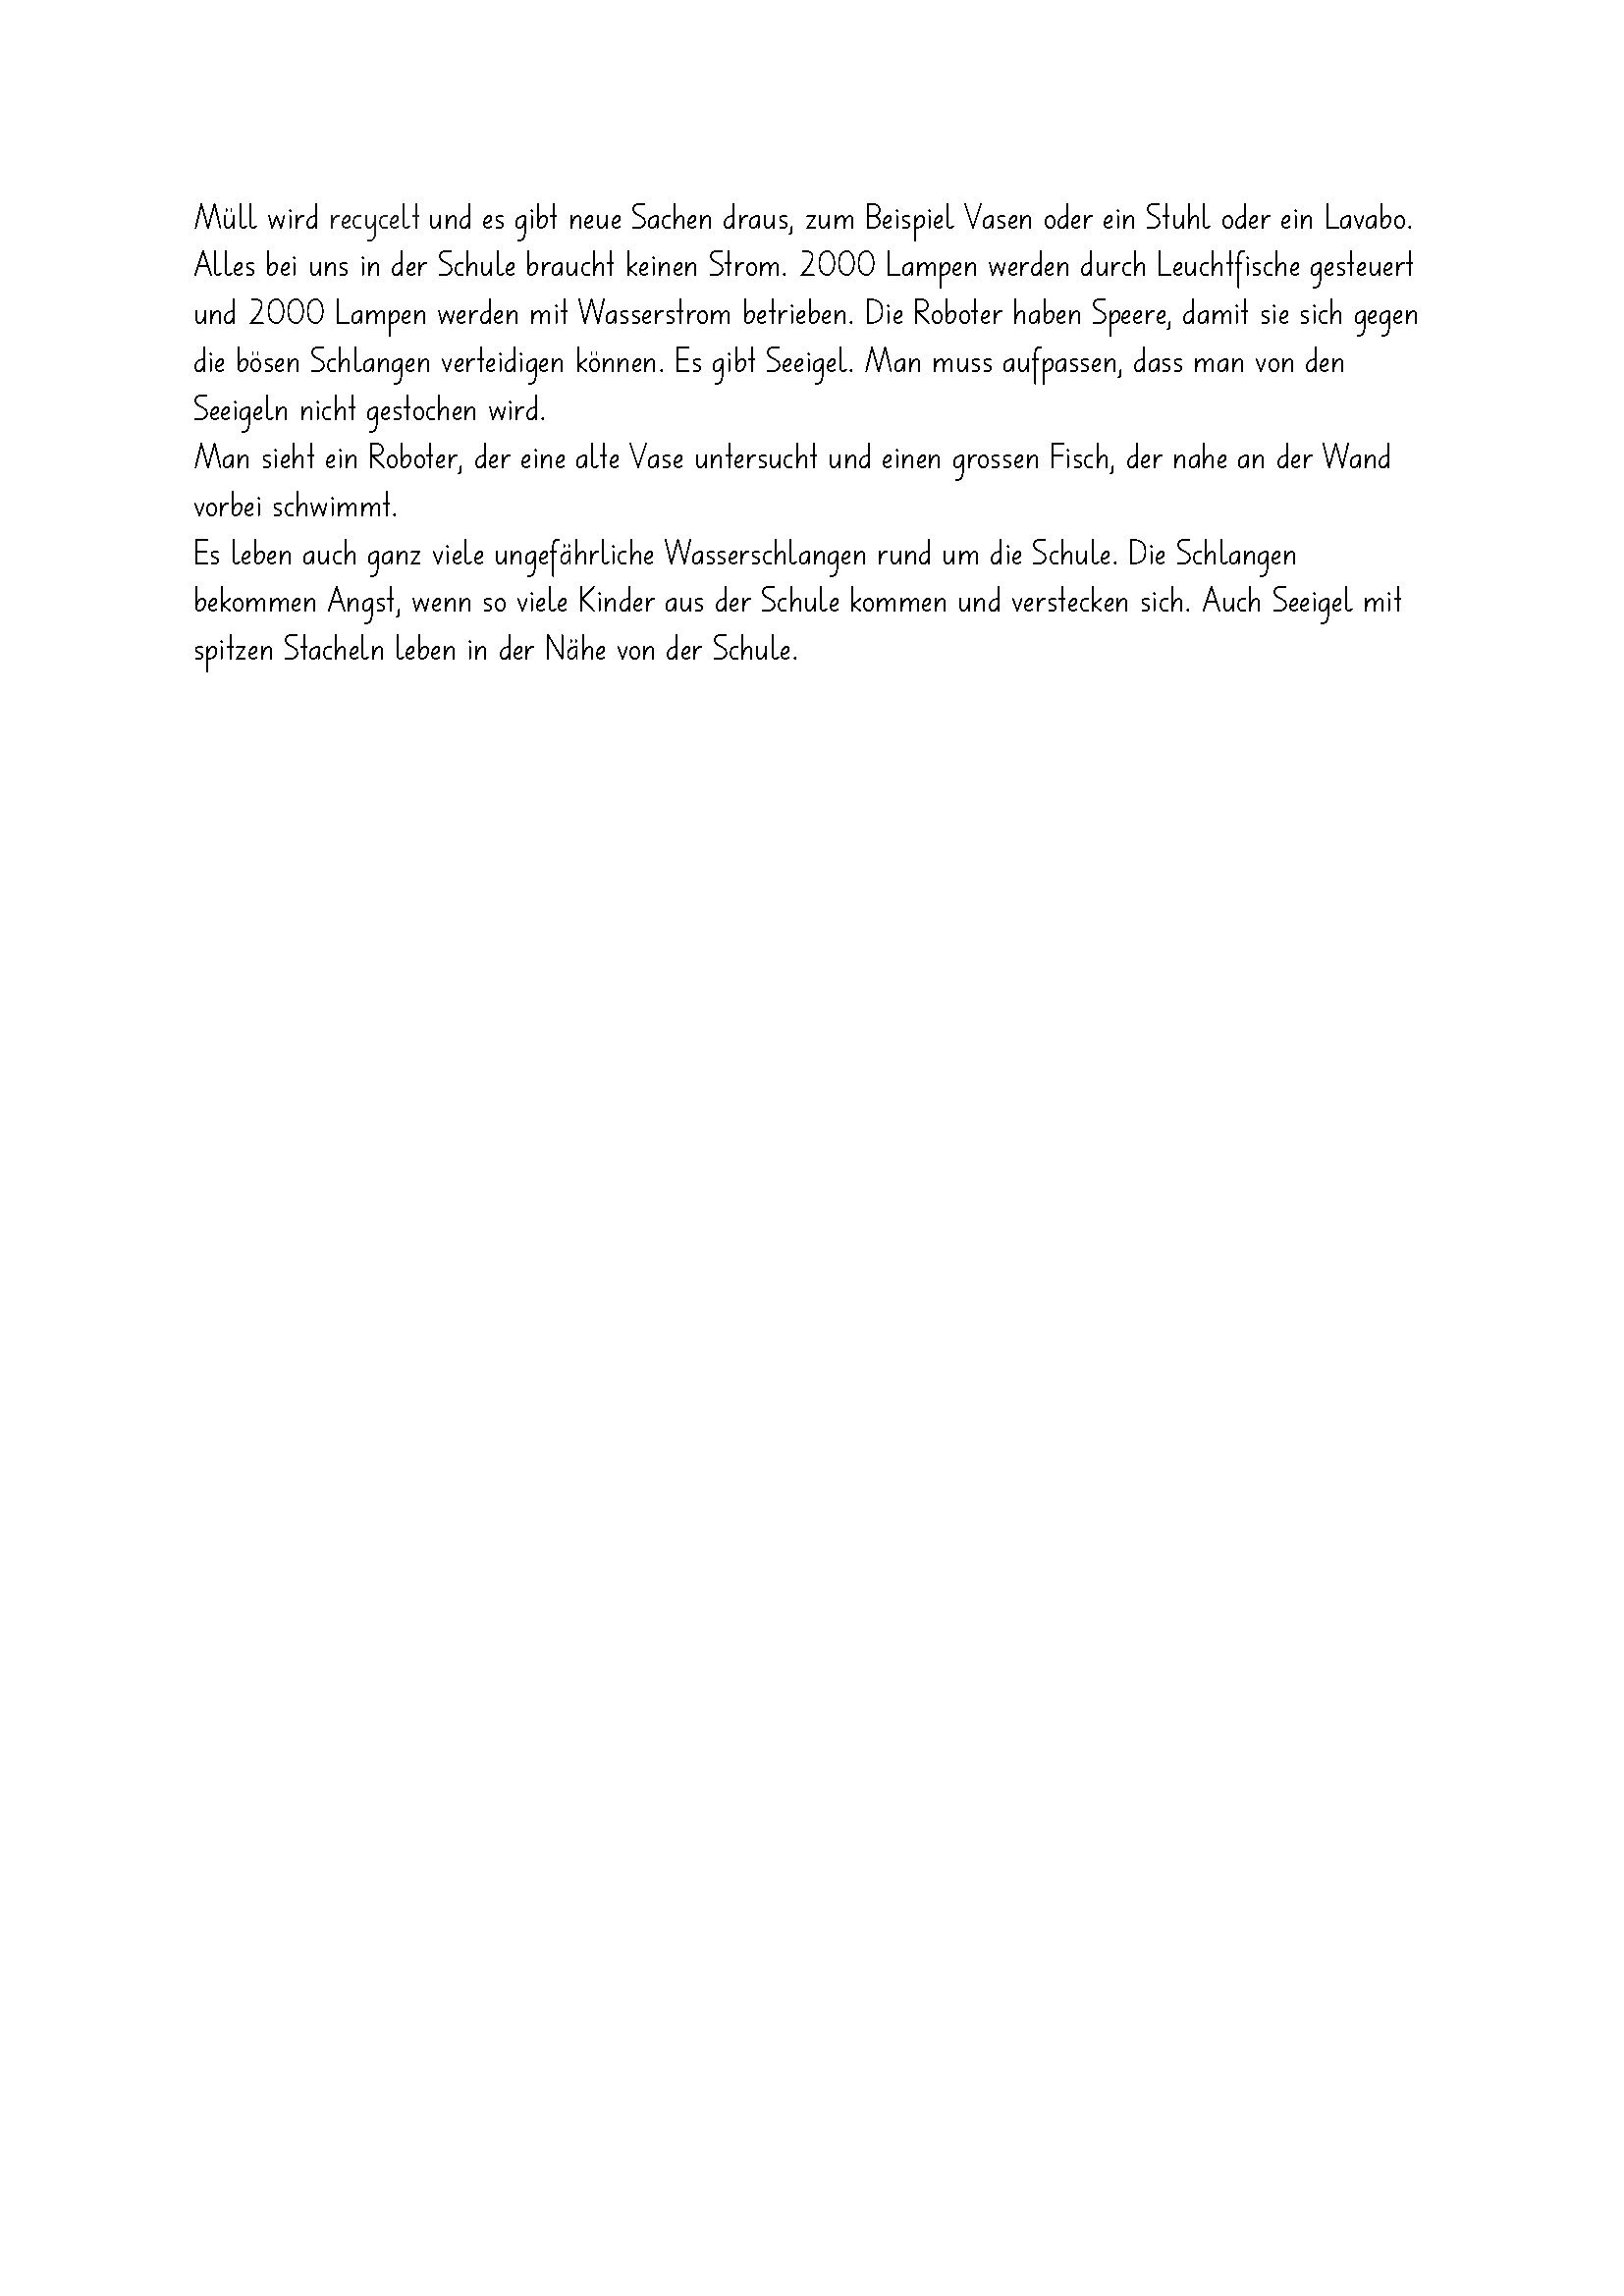 31_SHARK ZUKUNFTS Schule (Modell)_Page_2